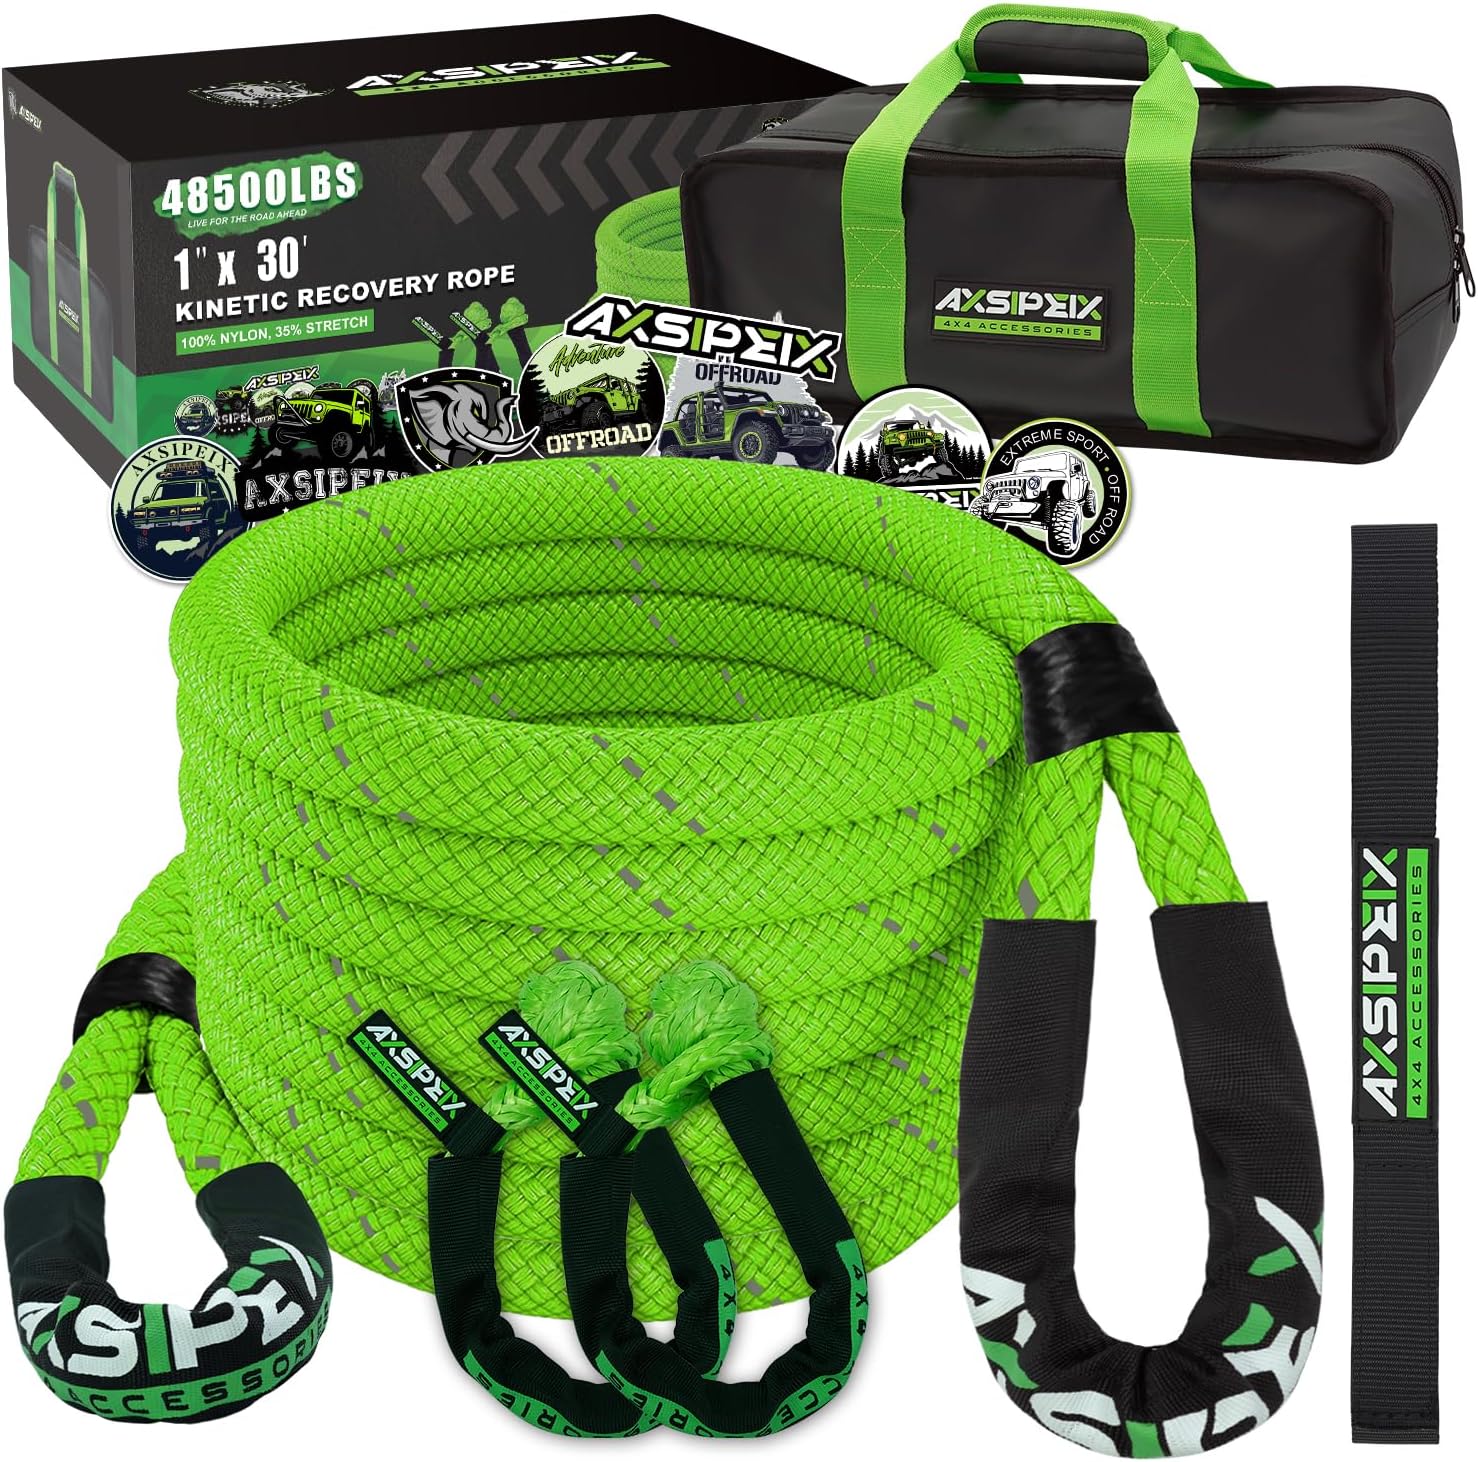  X XBEN Kinetic Recover Tow Ropes 1 x 20' (32,000lbs